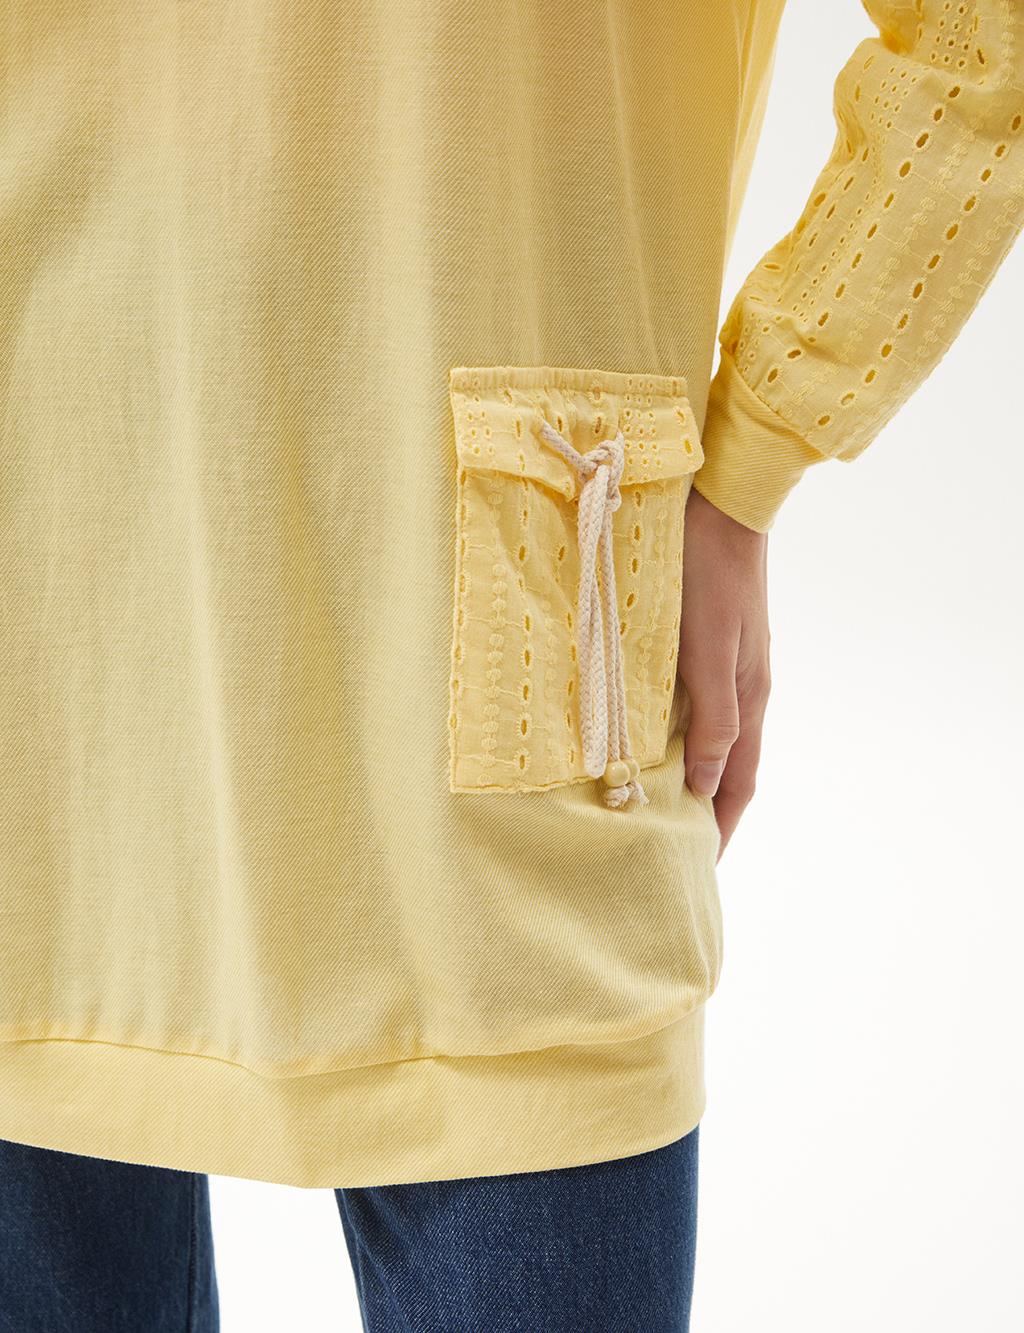 Embroidery Mixed Crew Neck Tunic Yellow